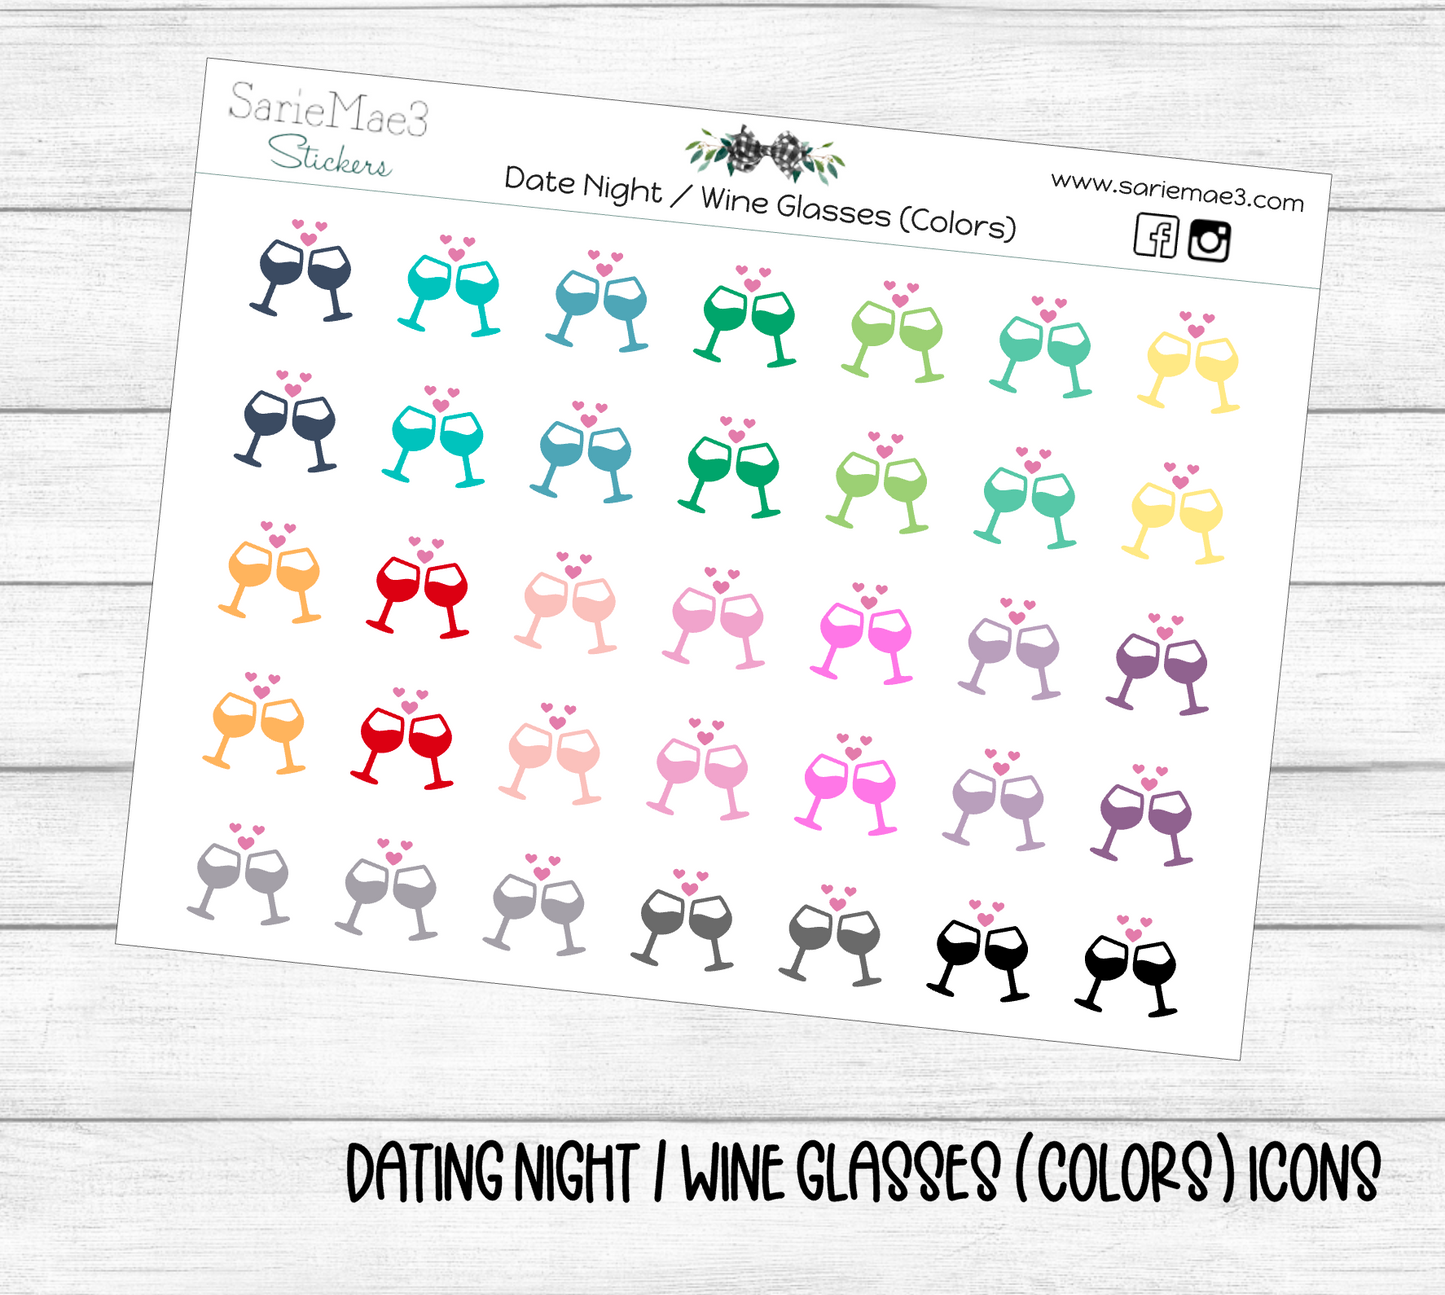 Date Night / Wine Glasses (Colors) Icons